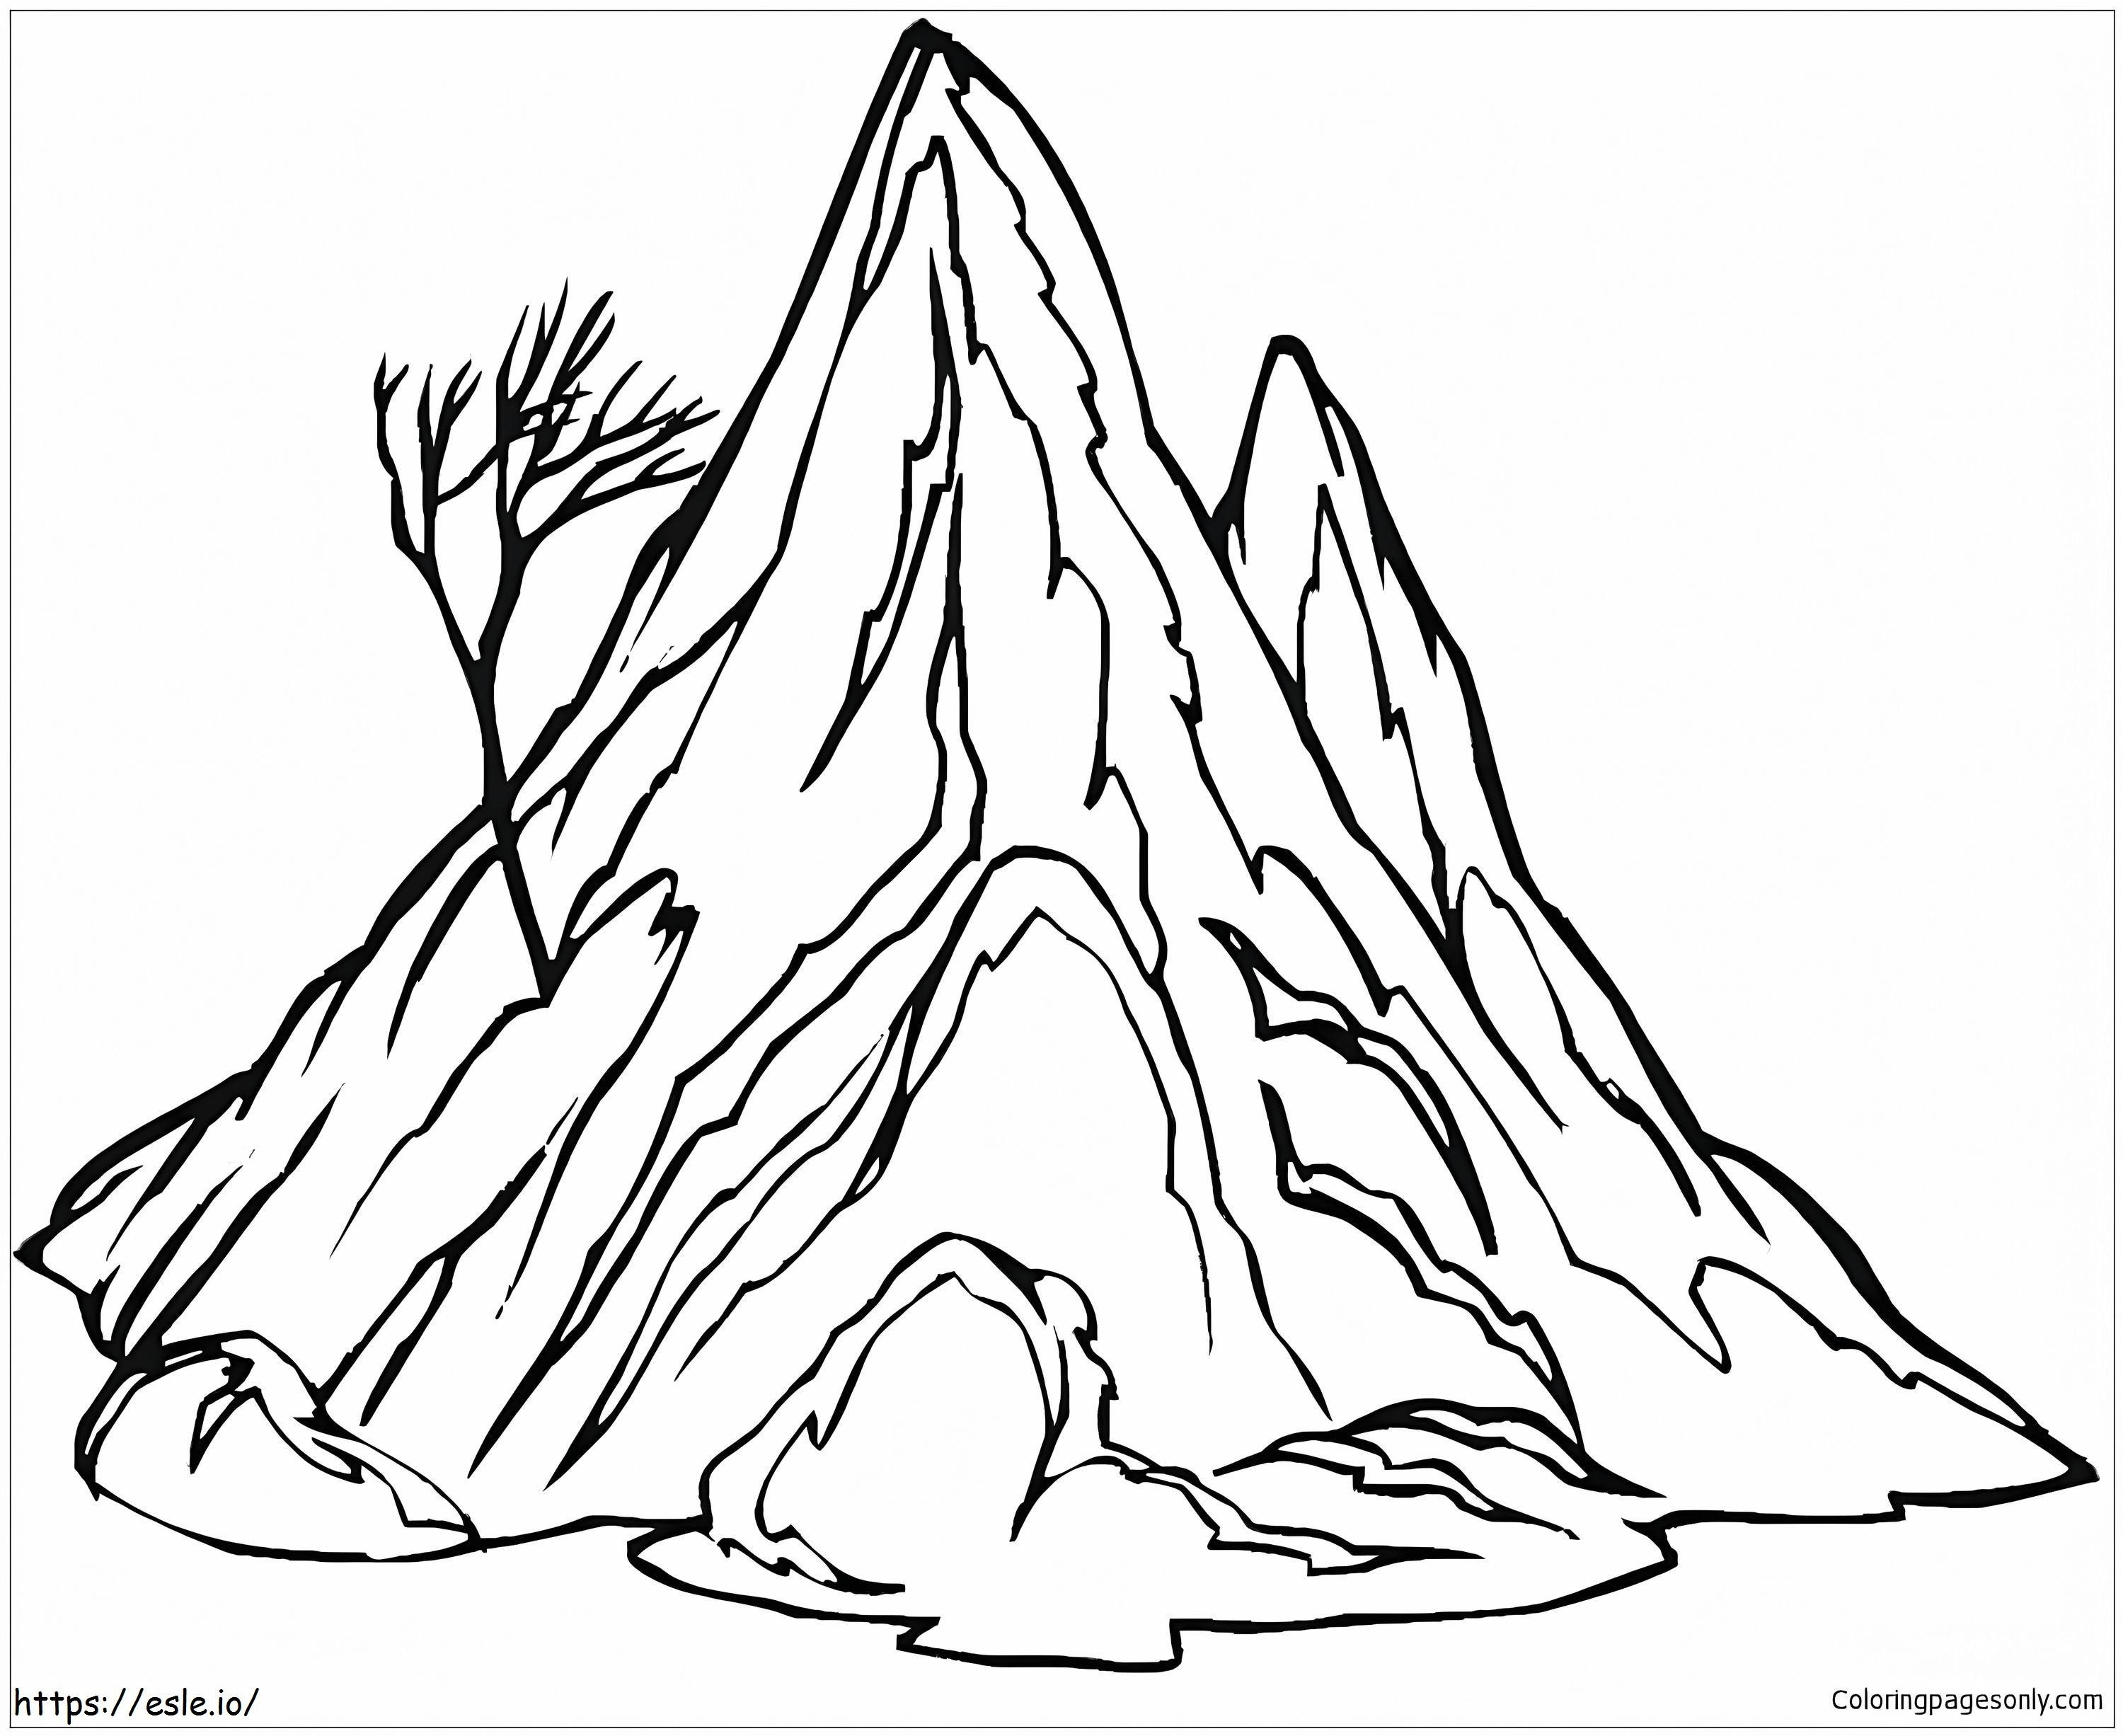 Mountain Stone 2 coloring page